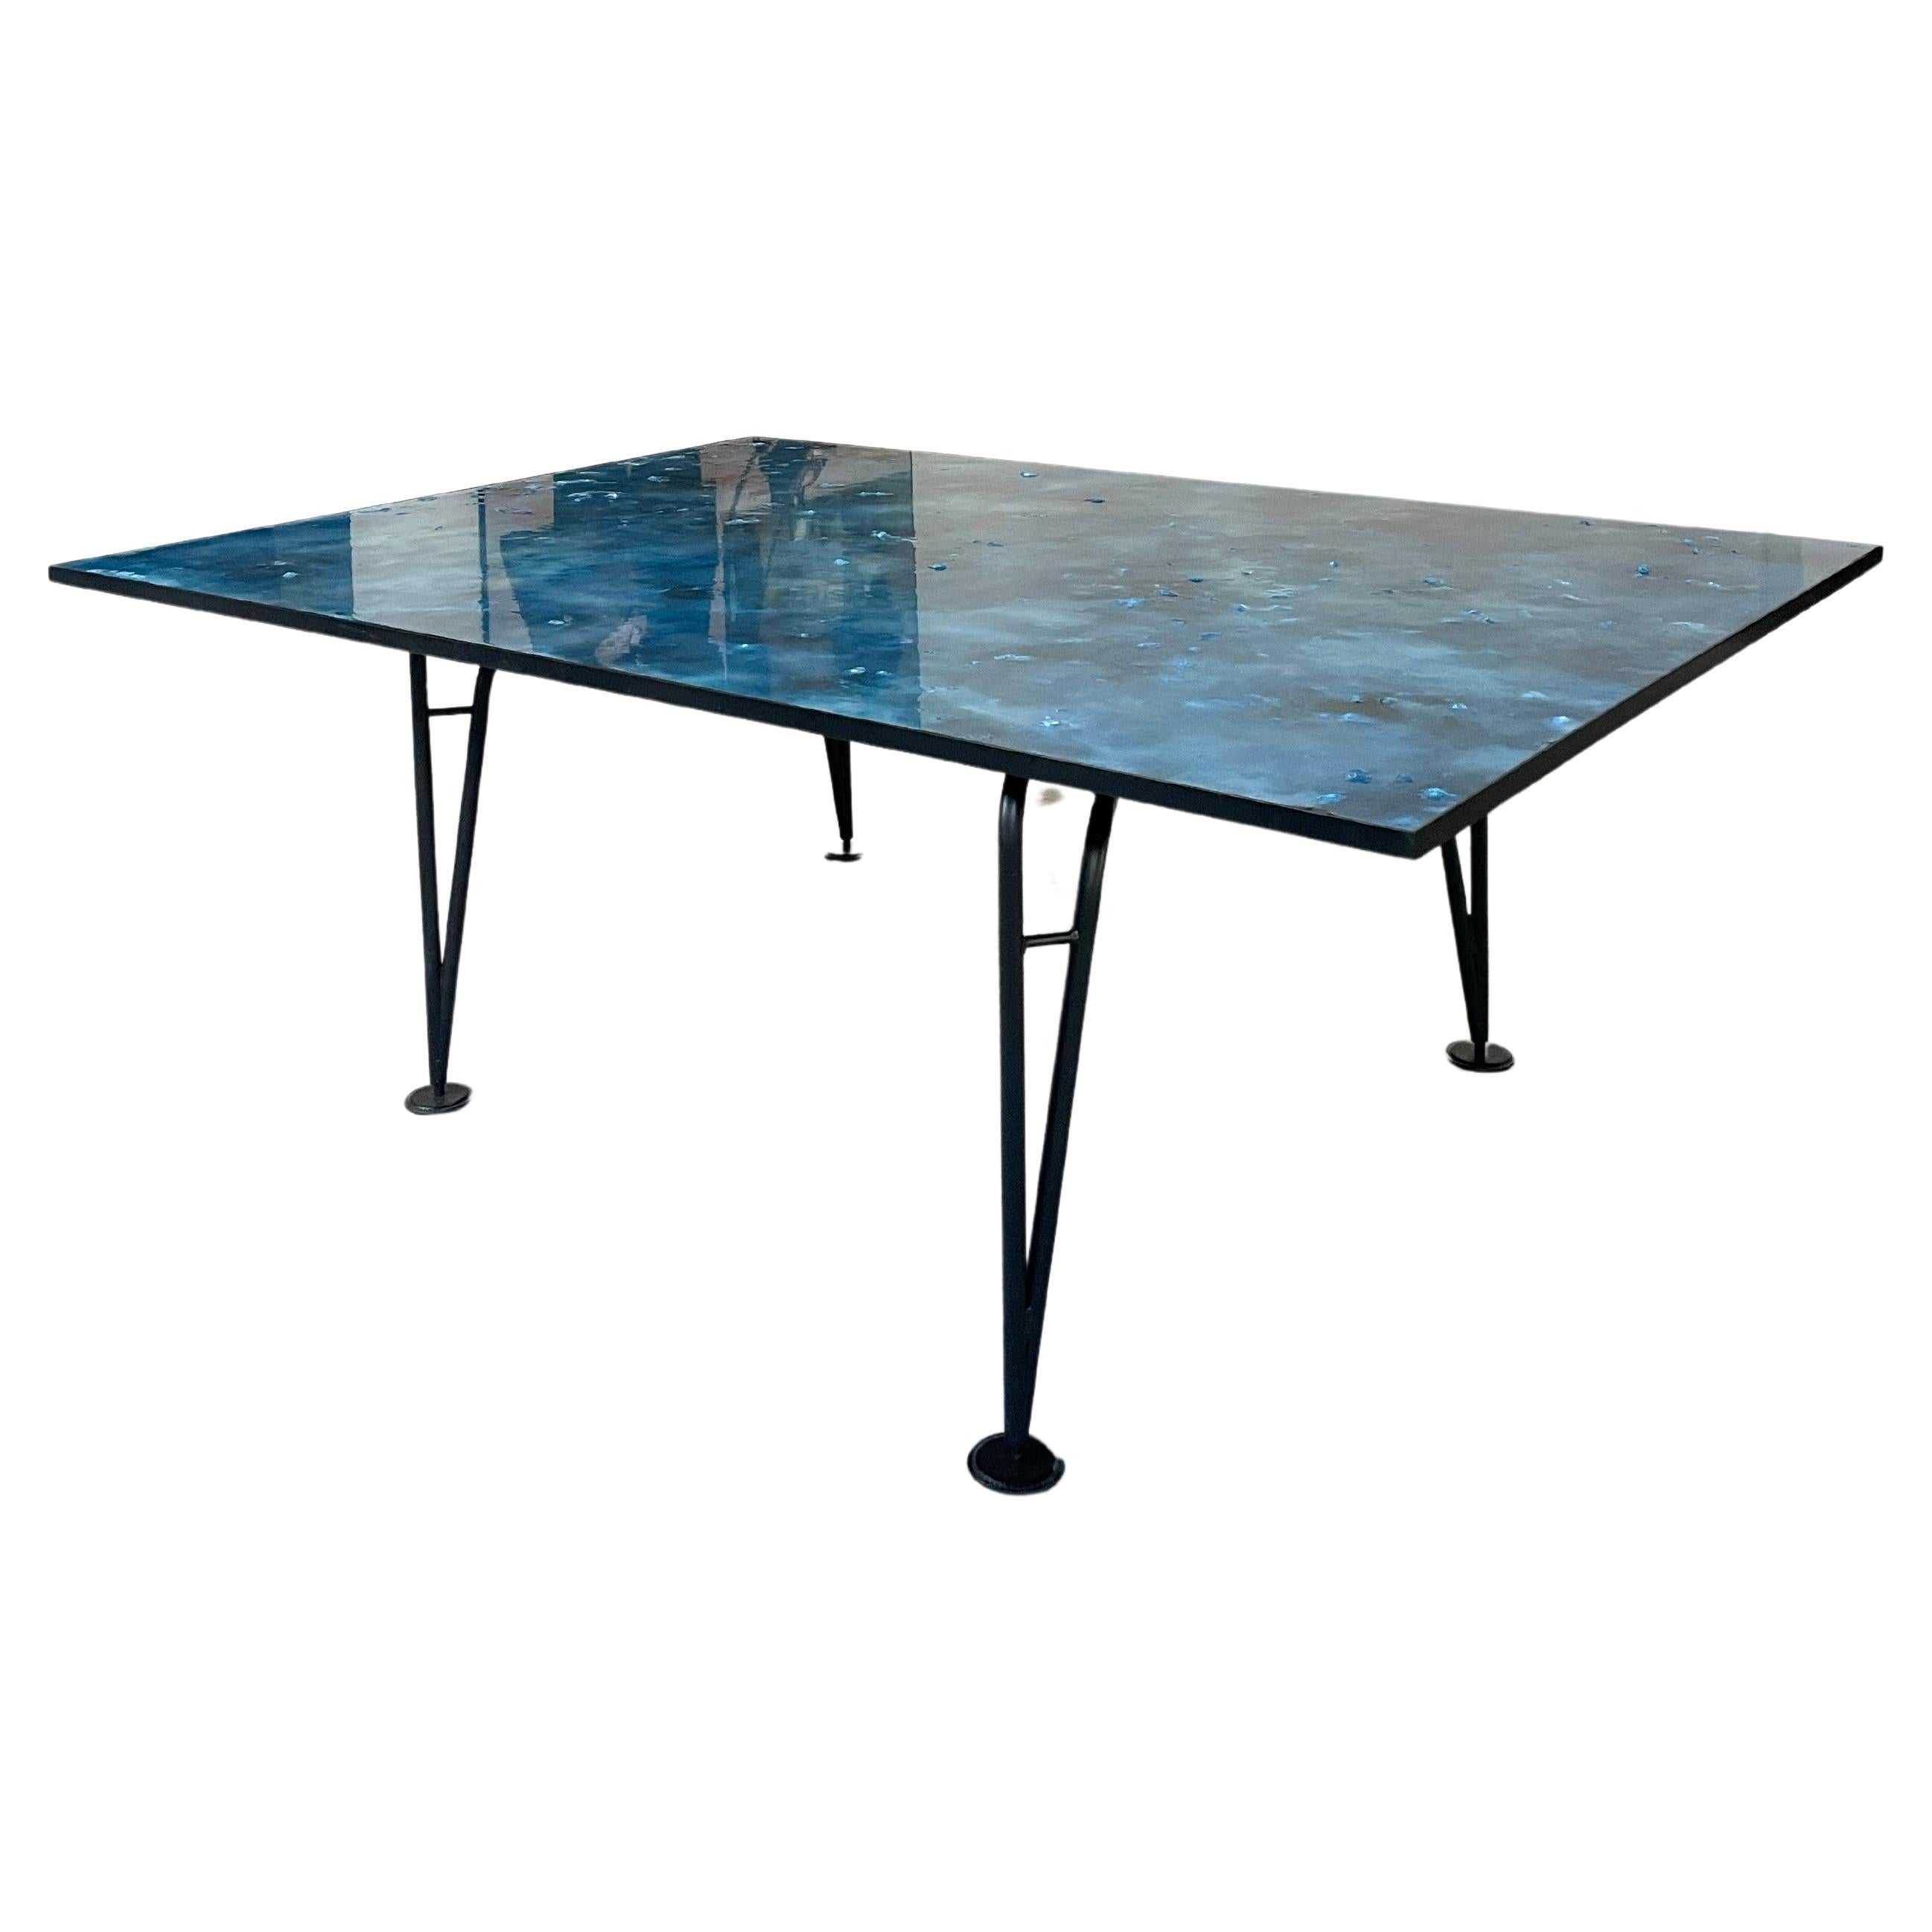 Asymmetrical - Collectible Design Table with Metal Legs and Resin Blue Top For Sale